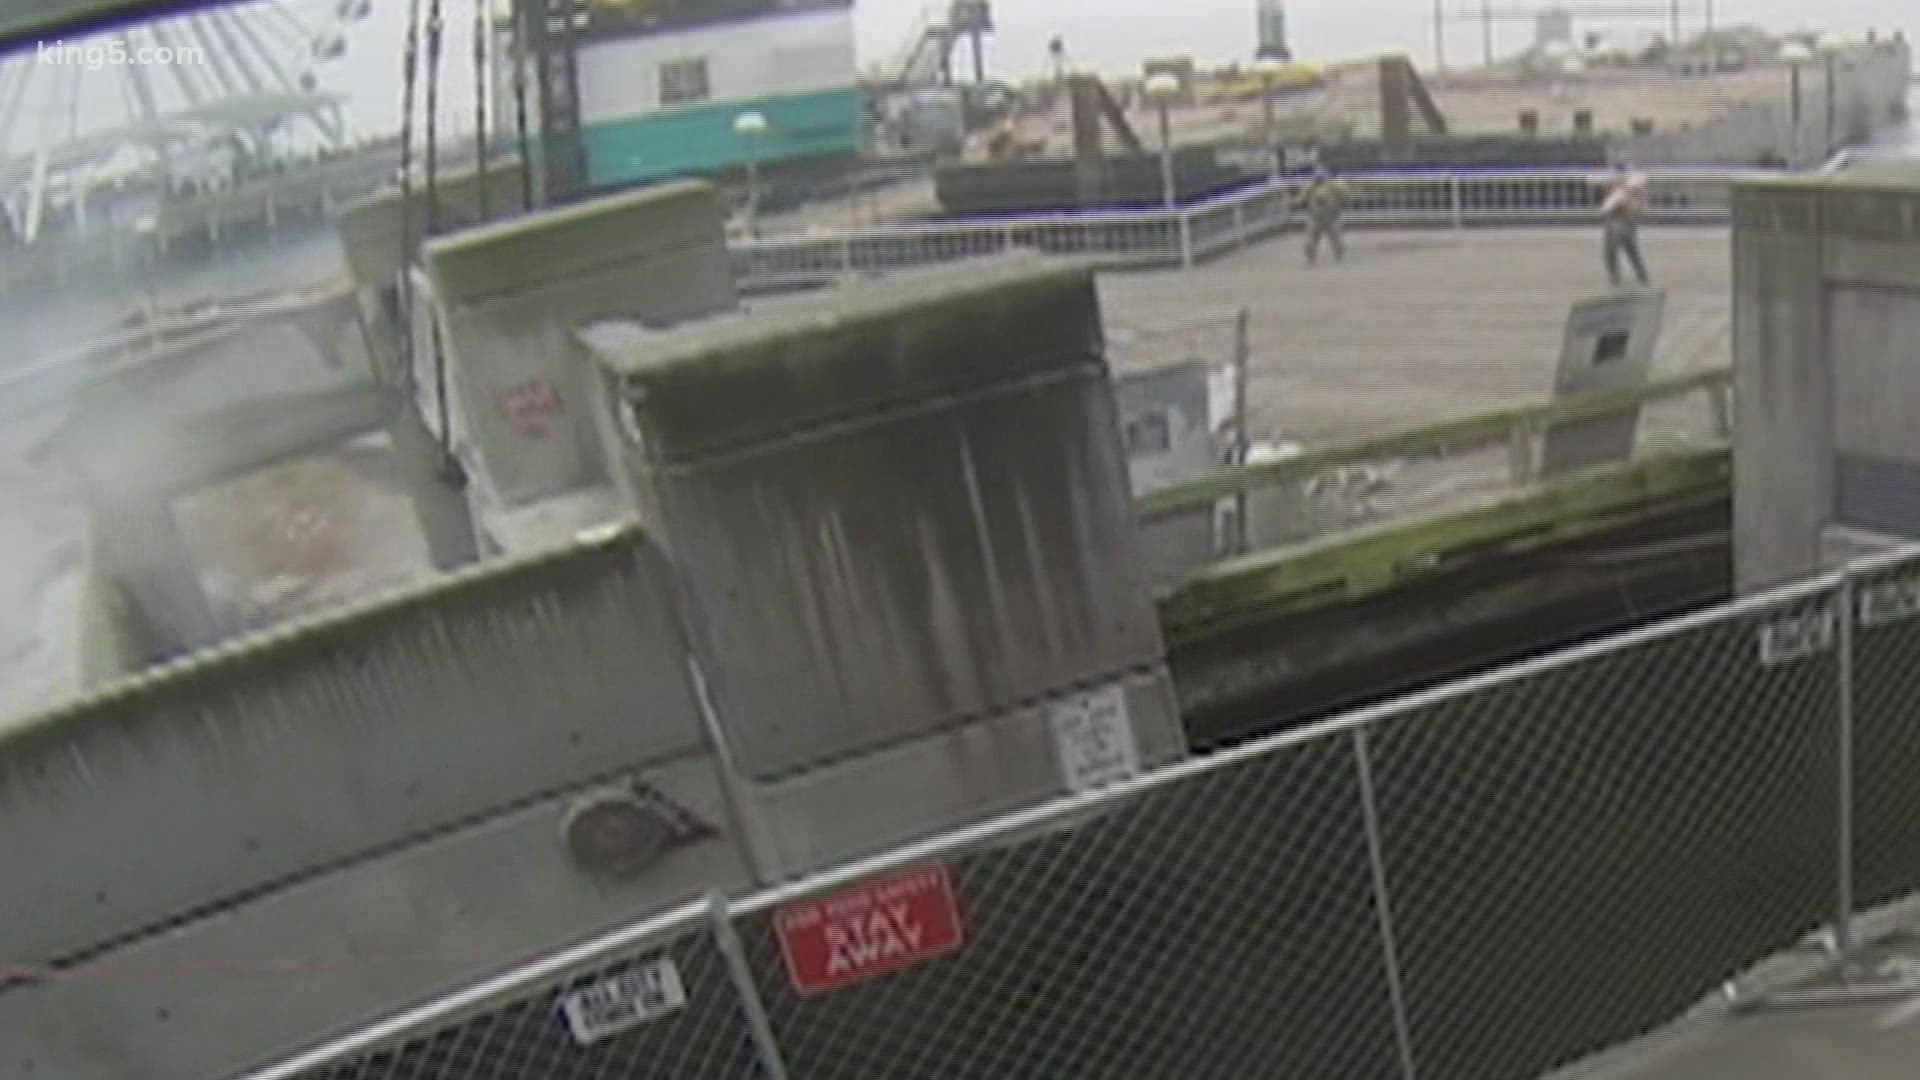 The city of Seattle have released surveillance footage of the moments that lead up to the Waterfront Park collapsing.